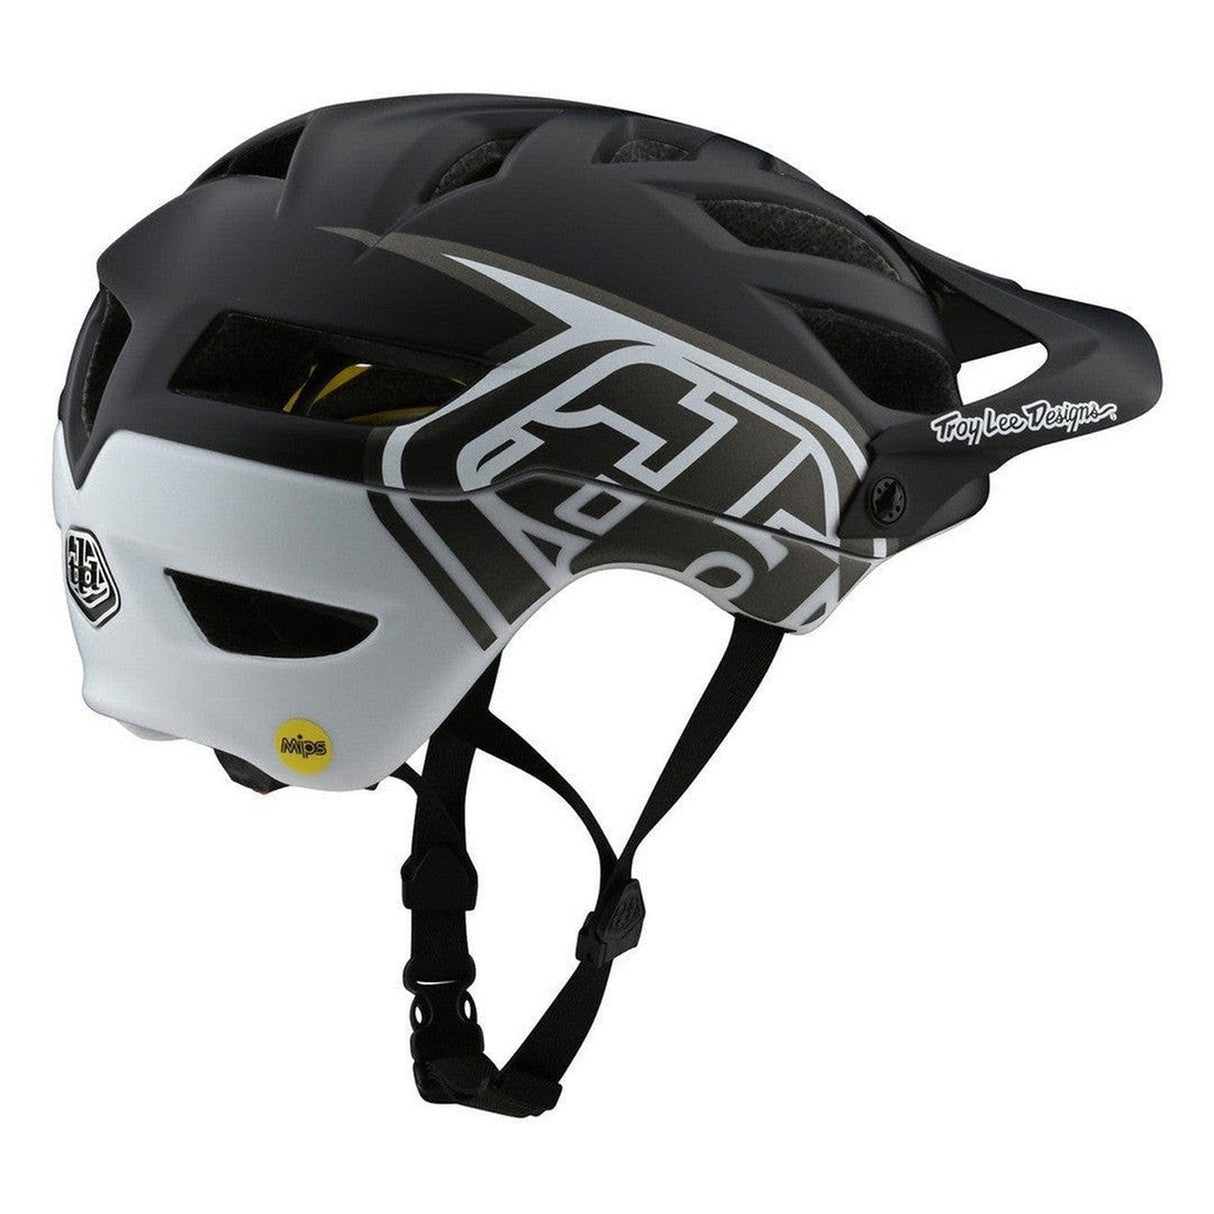 Troy Lee Designs A1 AS MIPS Helmet - Black/White Right Side